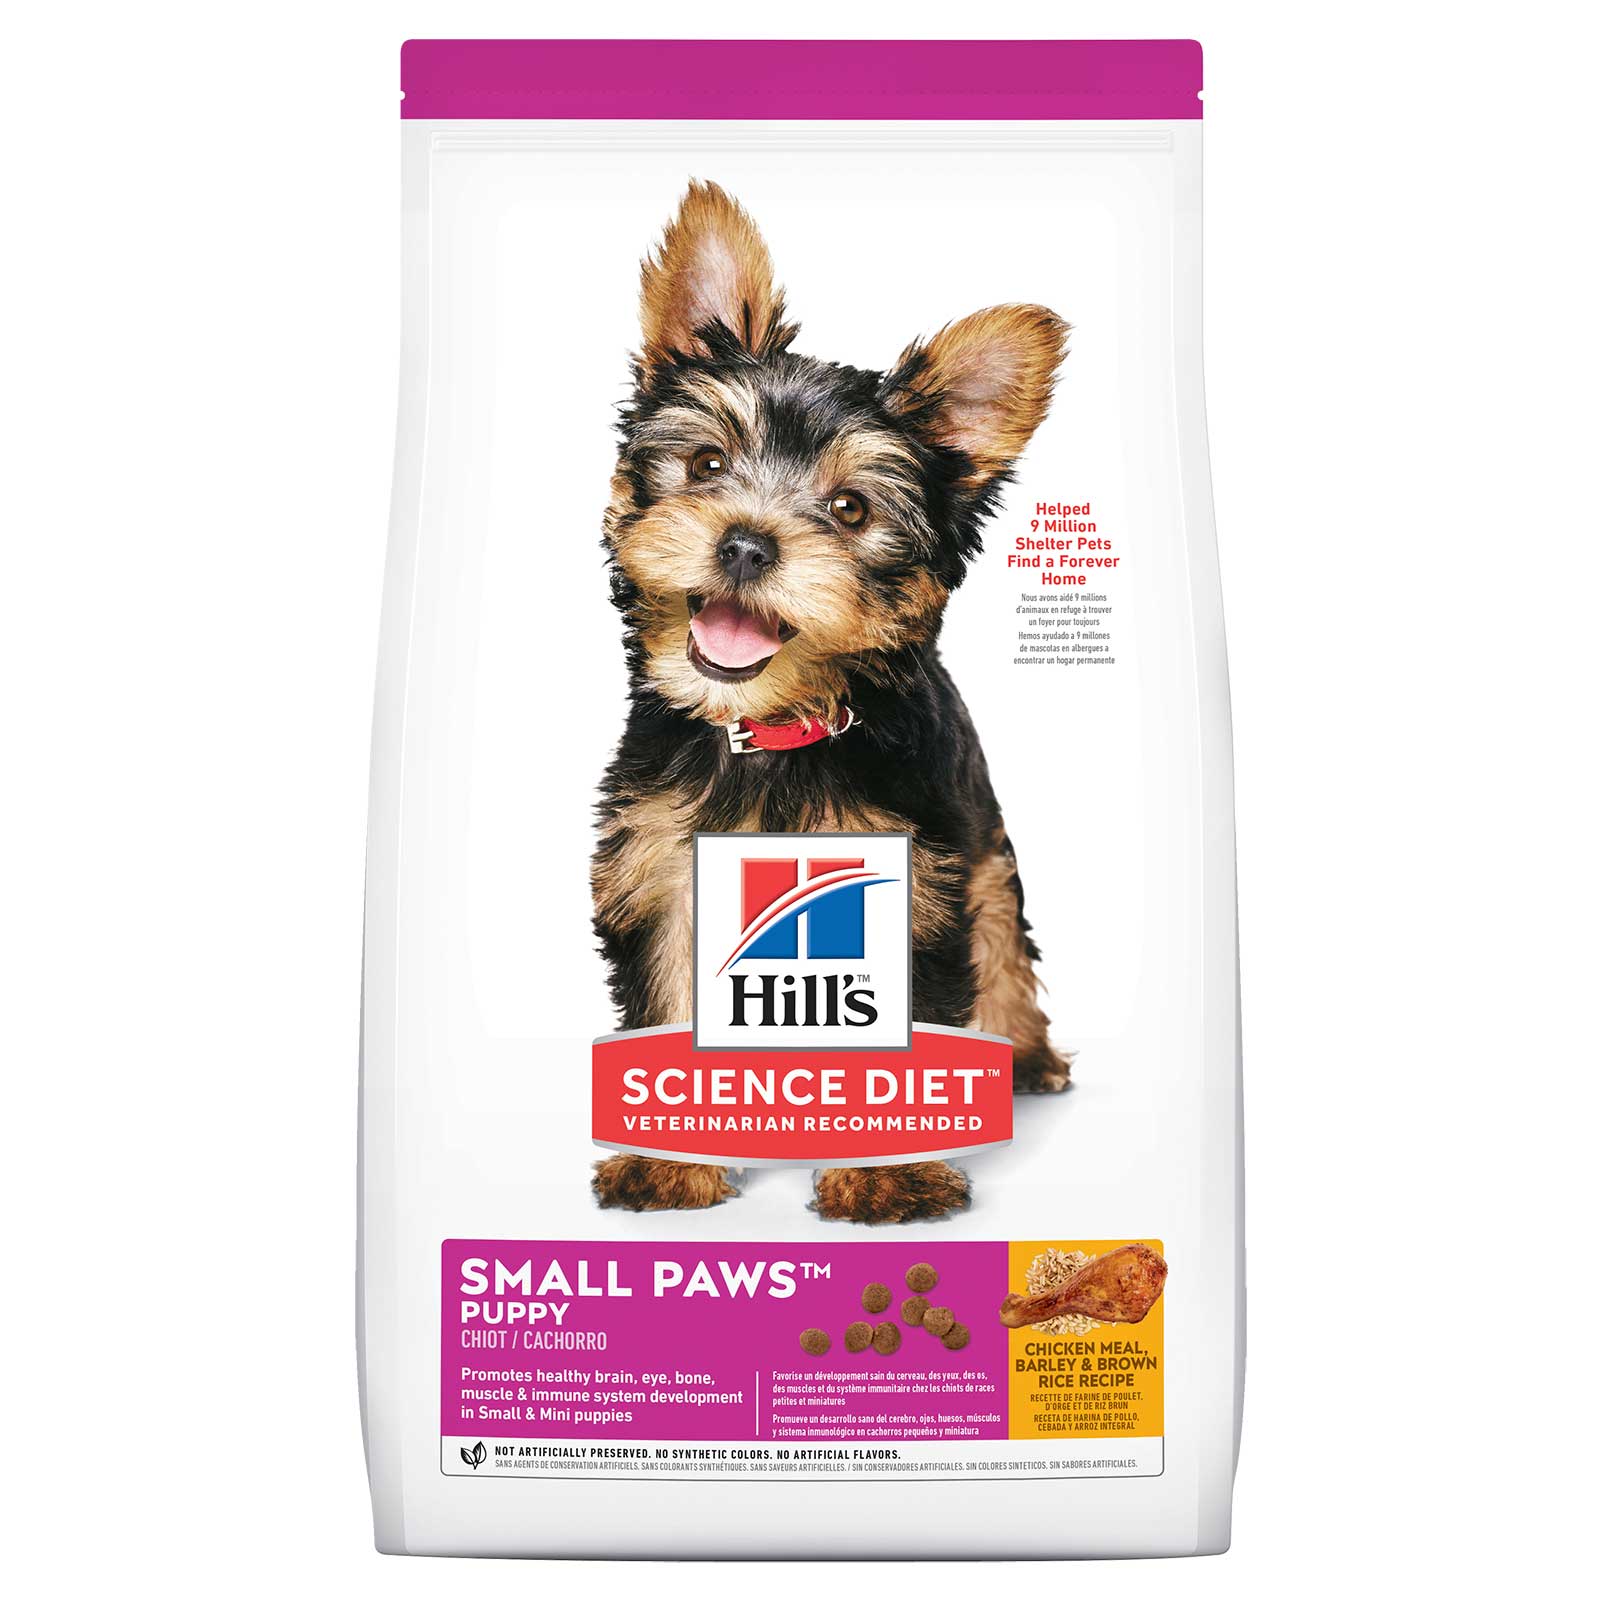 Hill's Science Diet Dog Food Puppy Small Paws